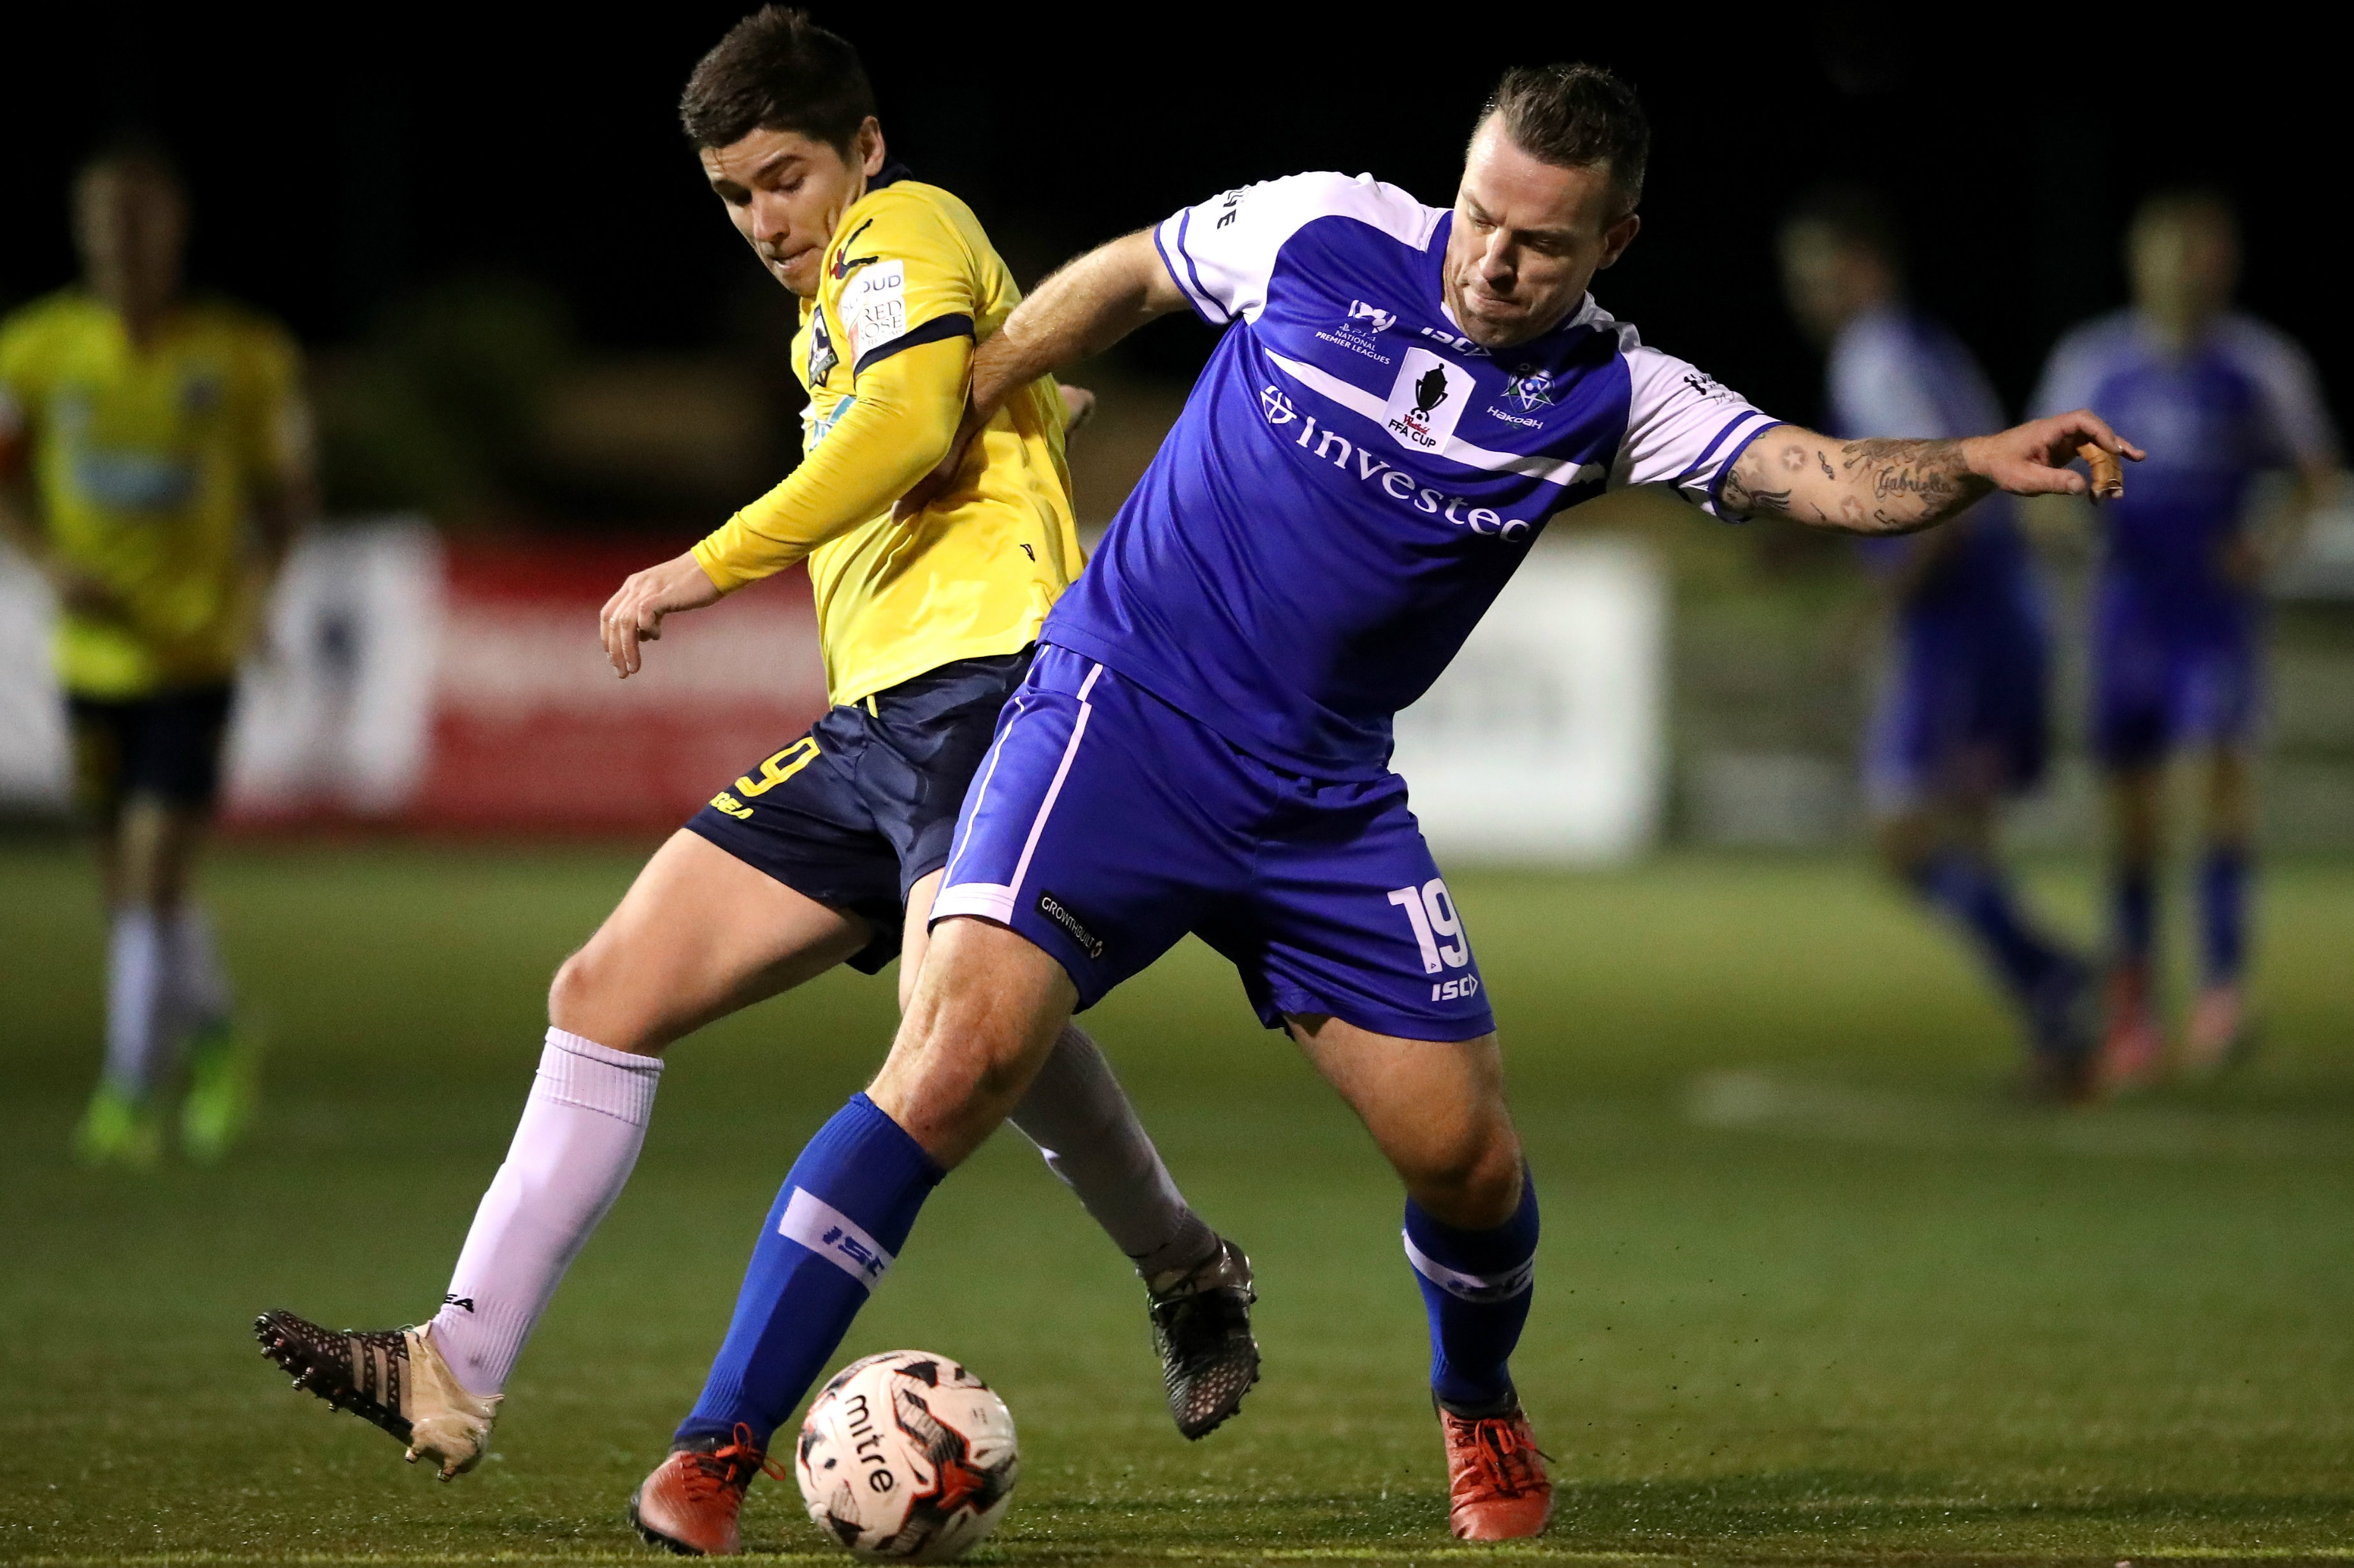 Hakoah player-manager Gavin Rae on the ball in the club's round of 32 clash against Hills United.